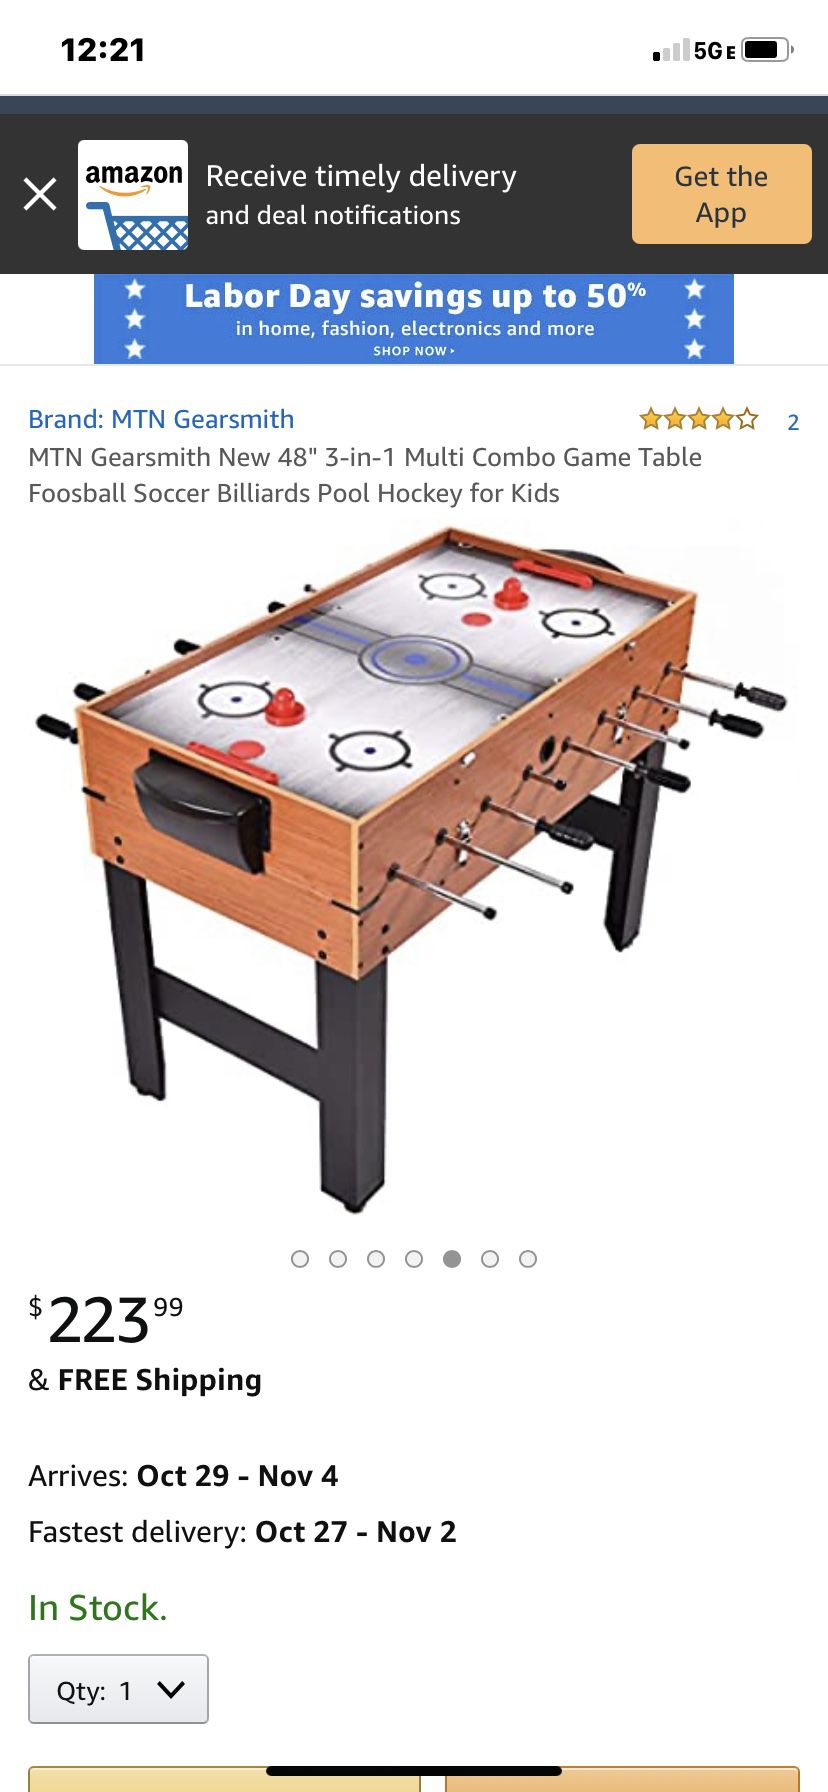 Multi combo game table.. foose ball slide hockey and pool table all in one